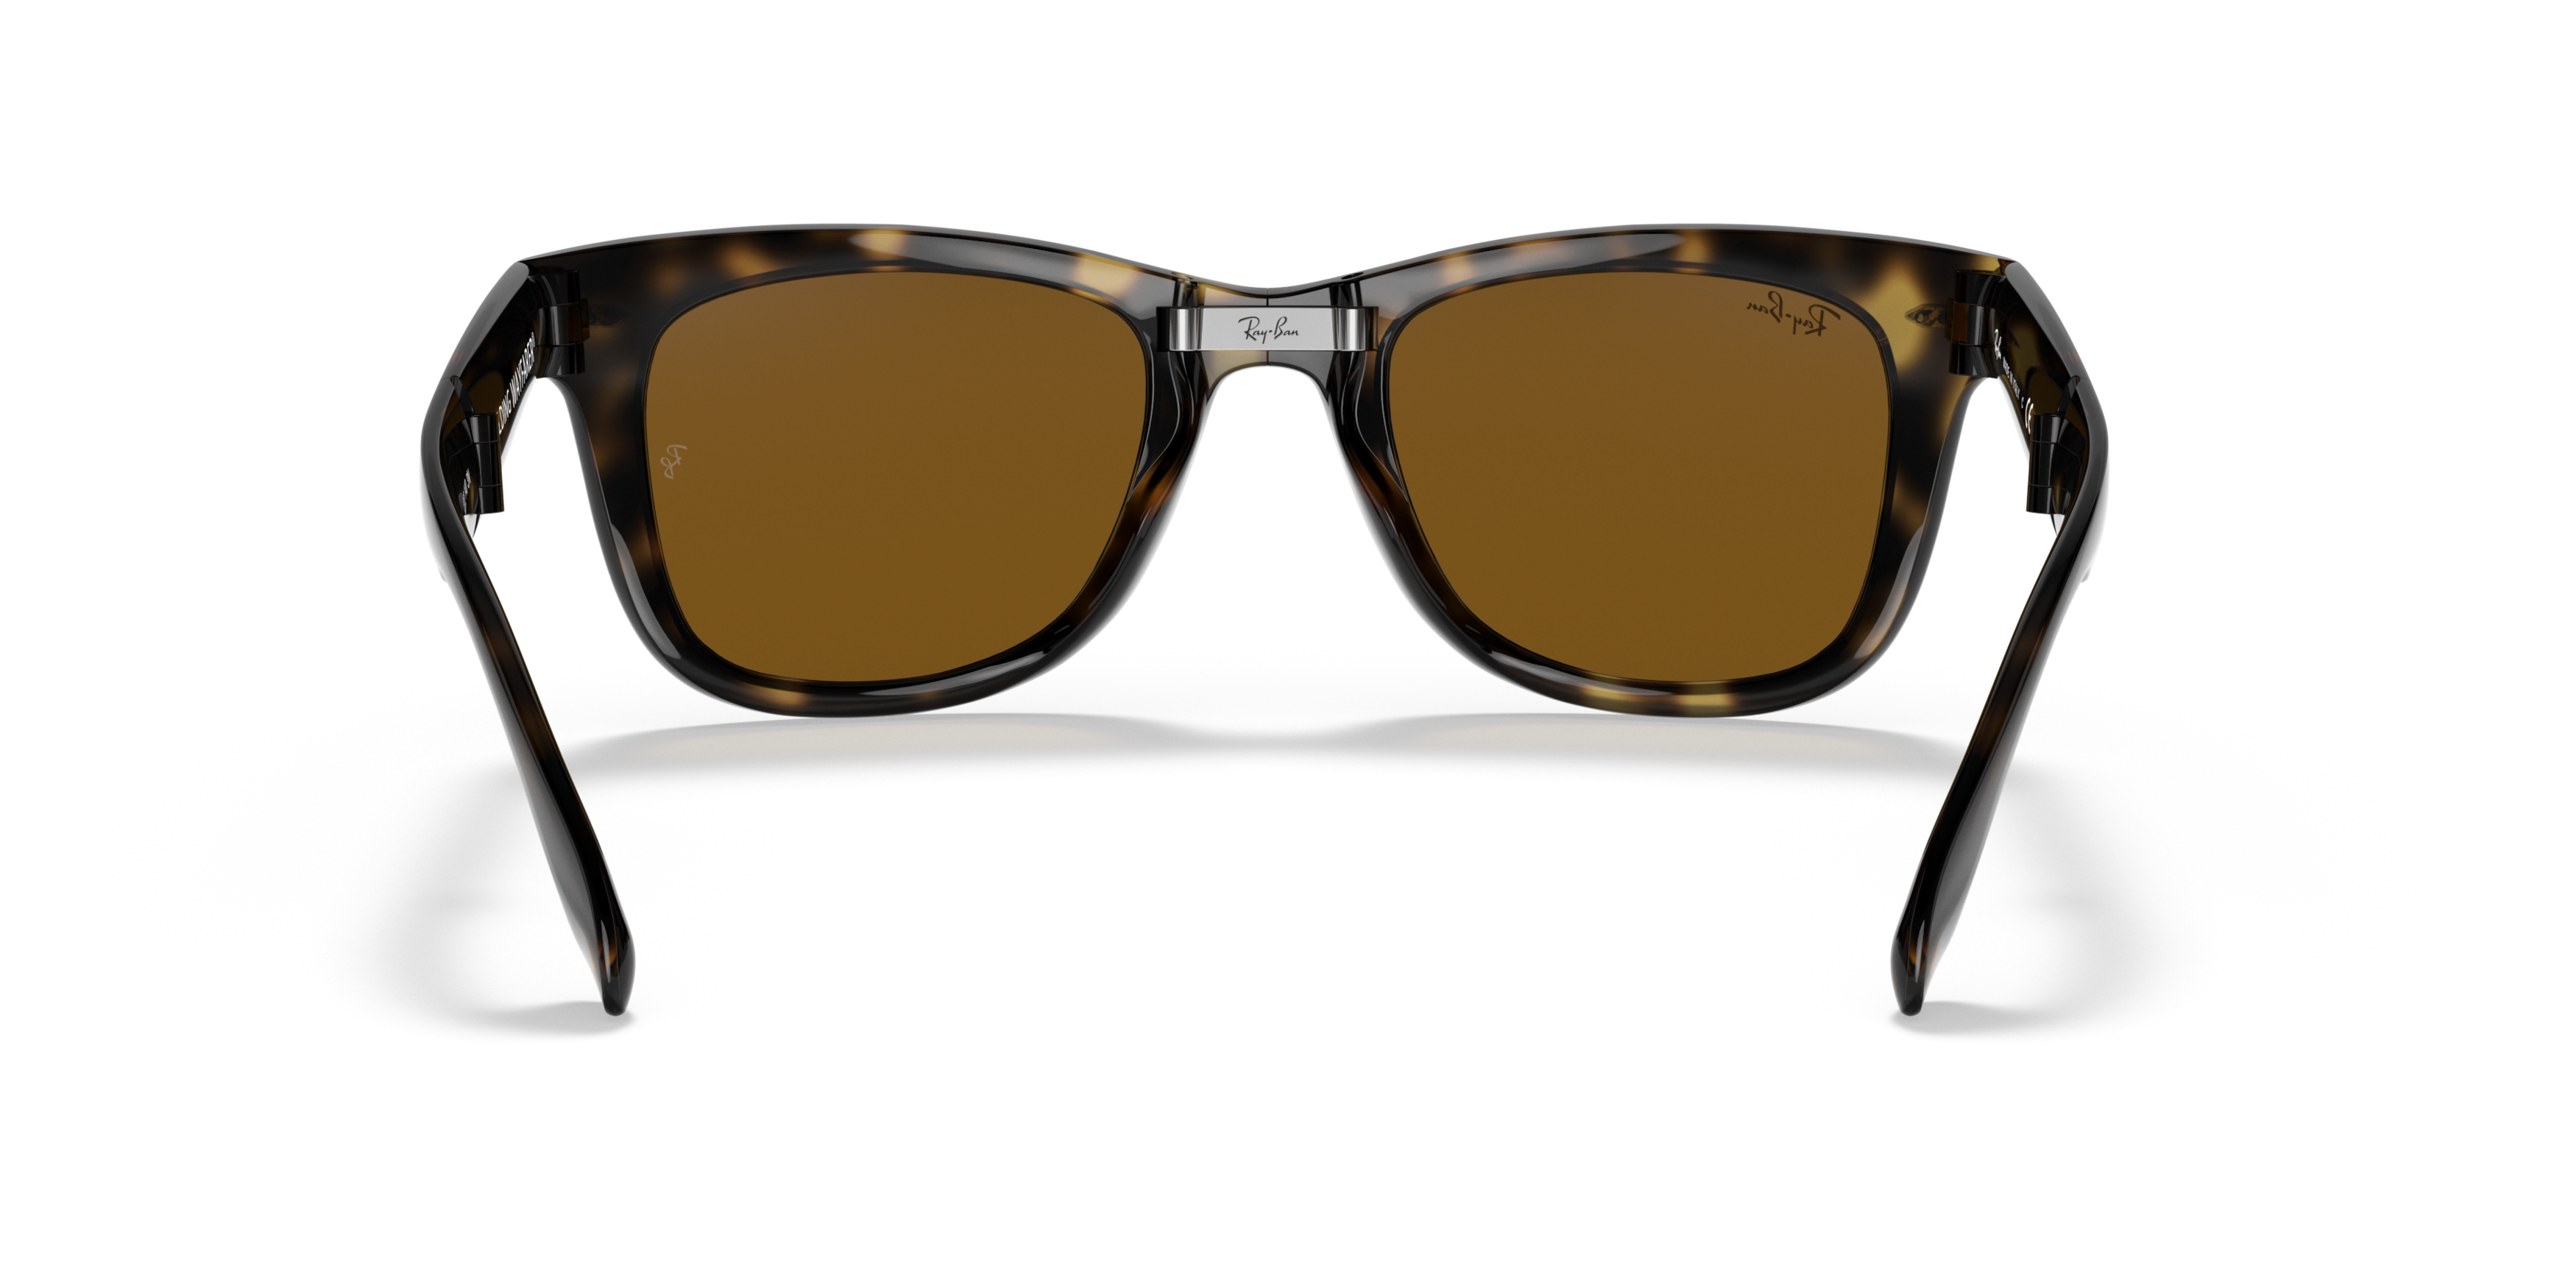 [products.image.detail02] Ray-Ban Wayfarer Folding Classic RB4105 710